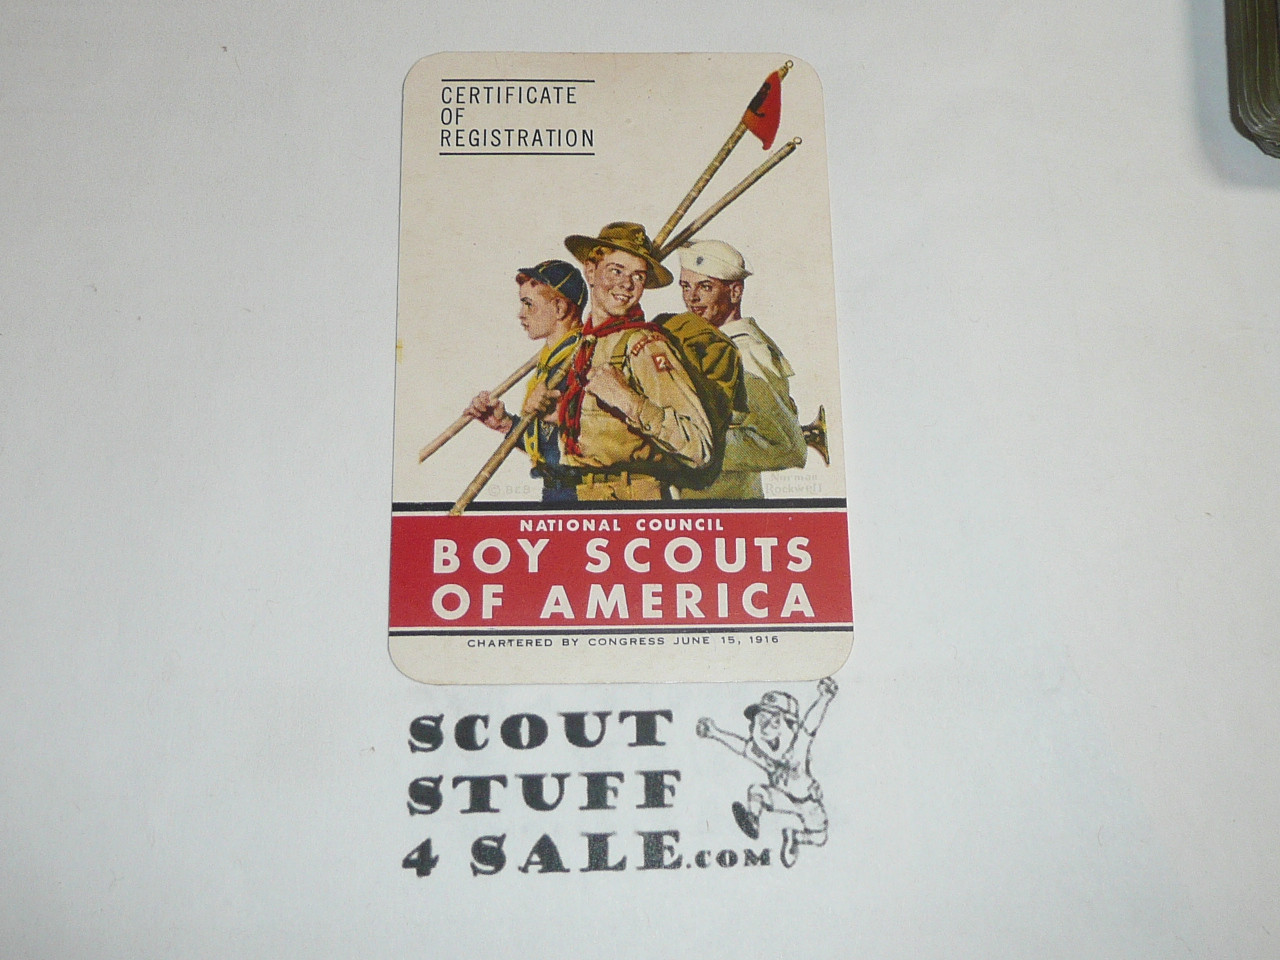 1947-1948 Cub Scout Membership Card, 6 signatures, buyer to receive a card expiring ranging from 1948-1949 of this style, BSMC76